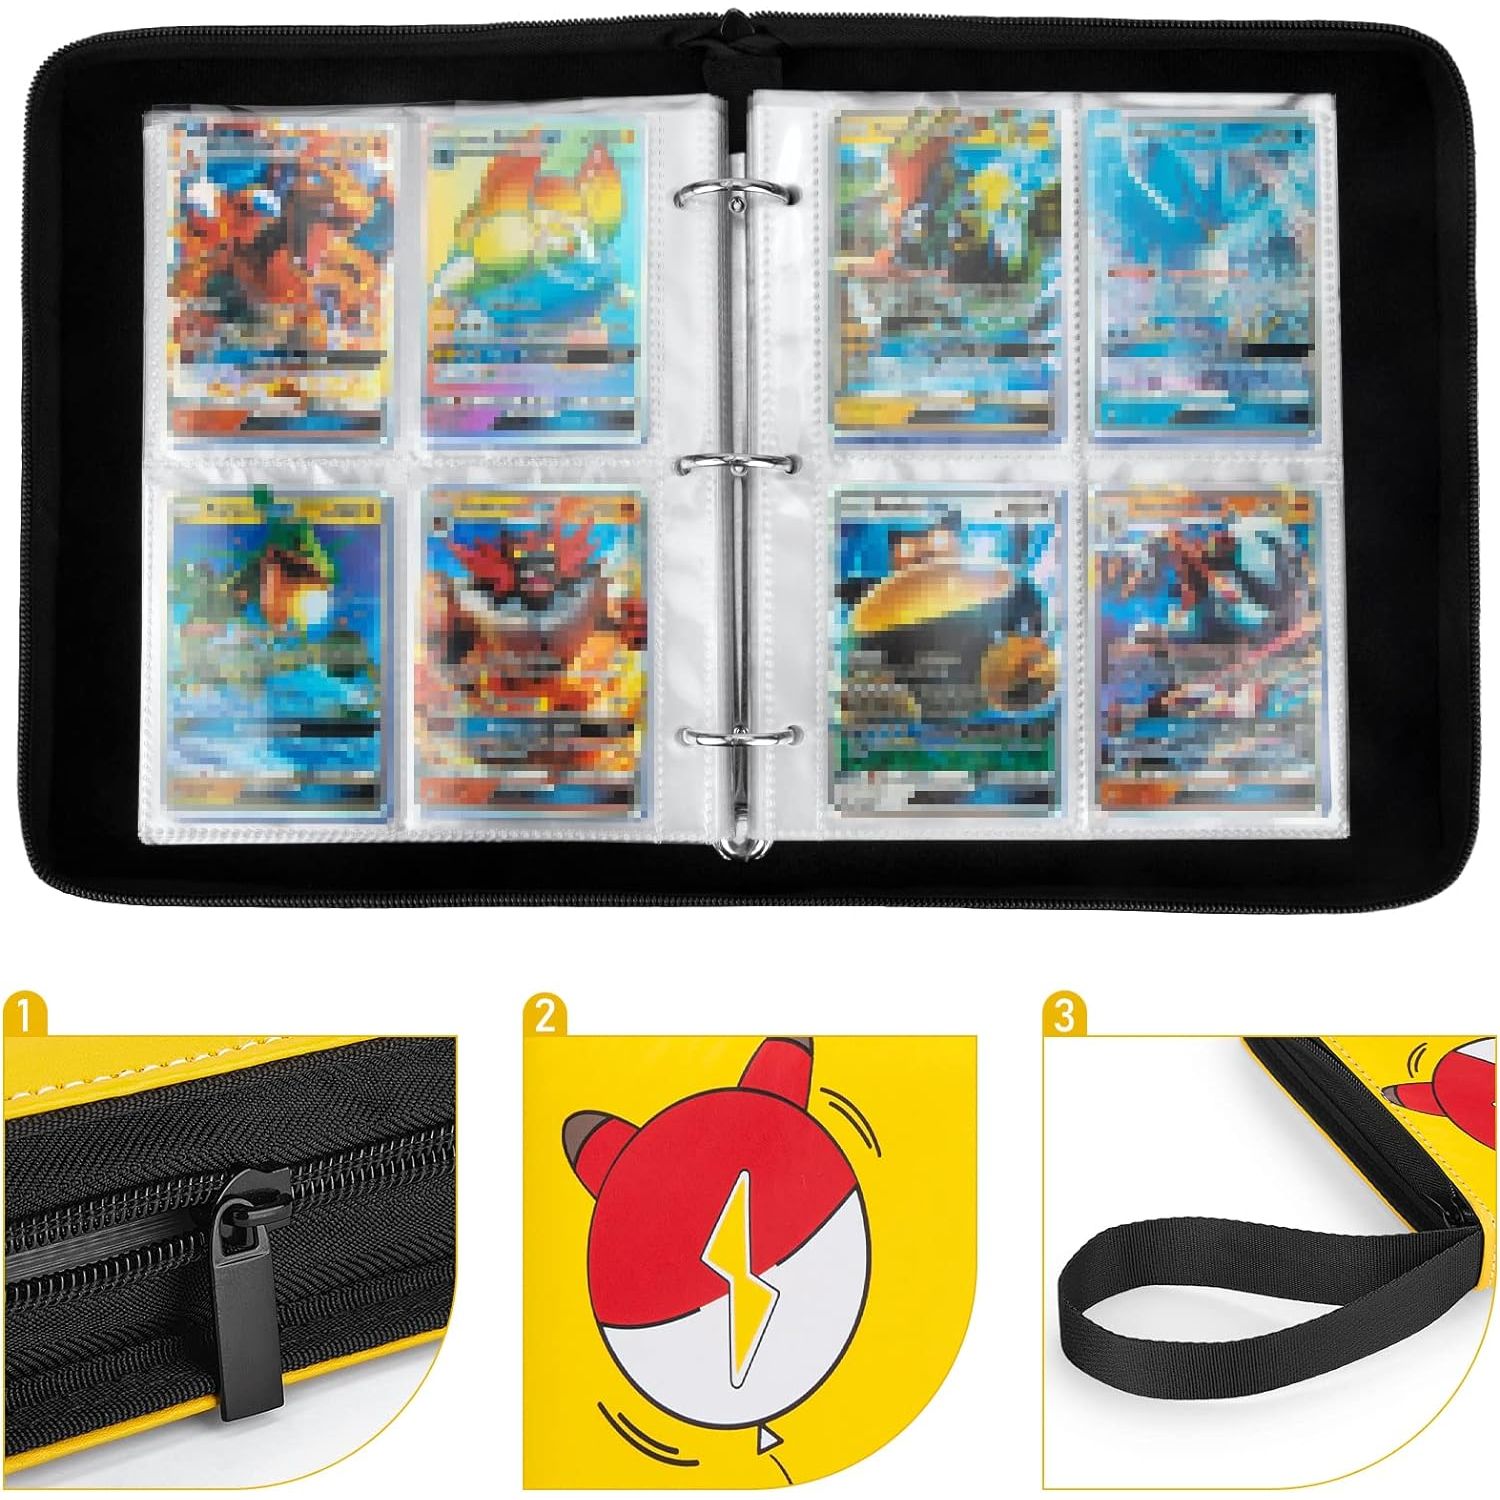 Yinke Binder Case for PM Card, PM TCG Card Holds Up to 400 Cards with 50 Premium